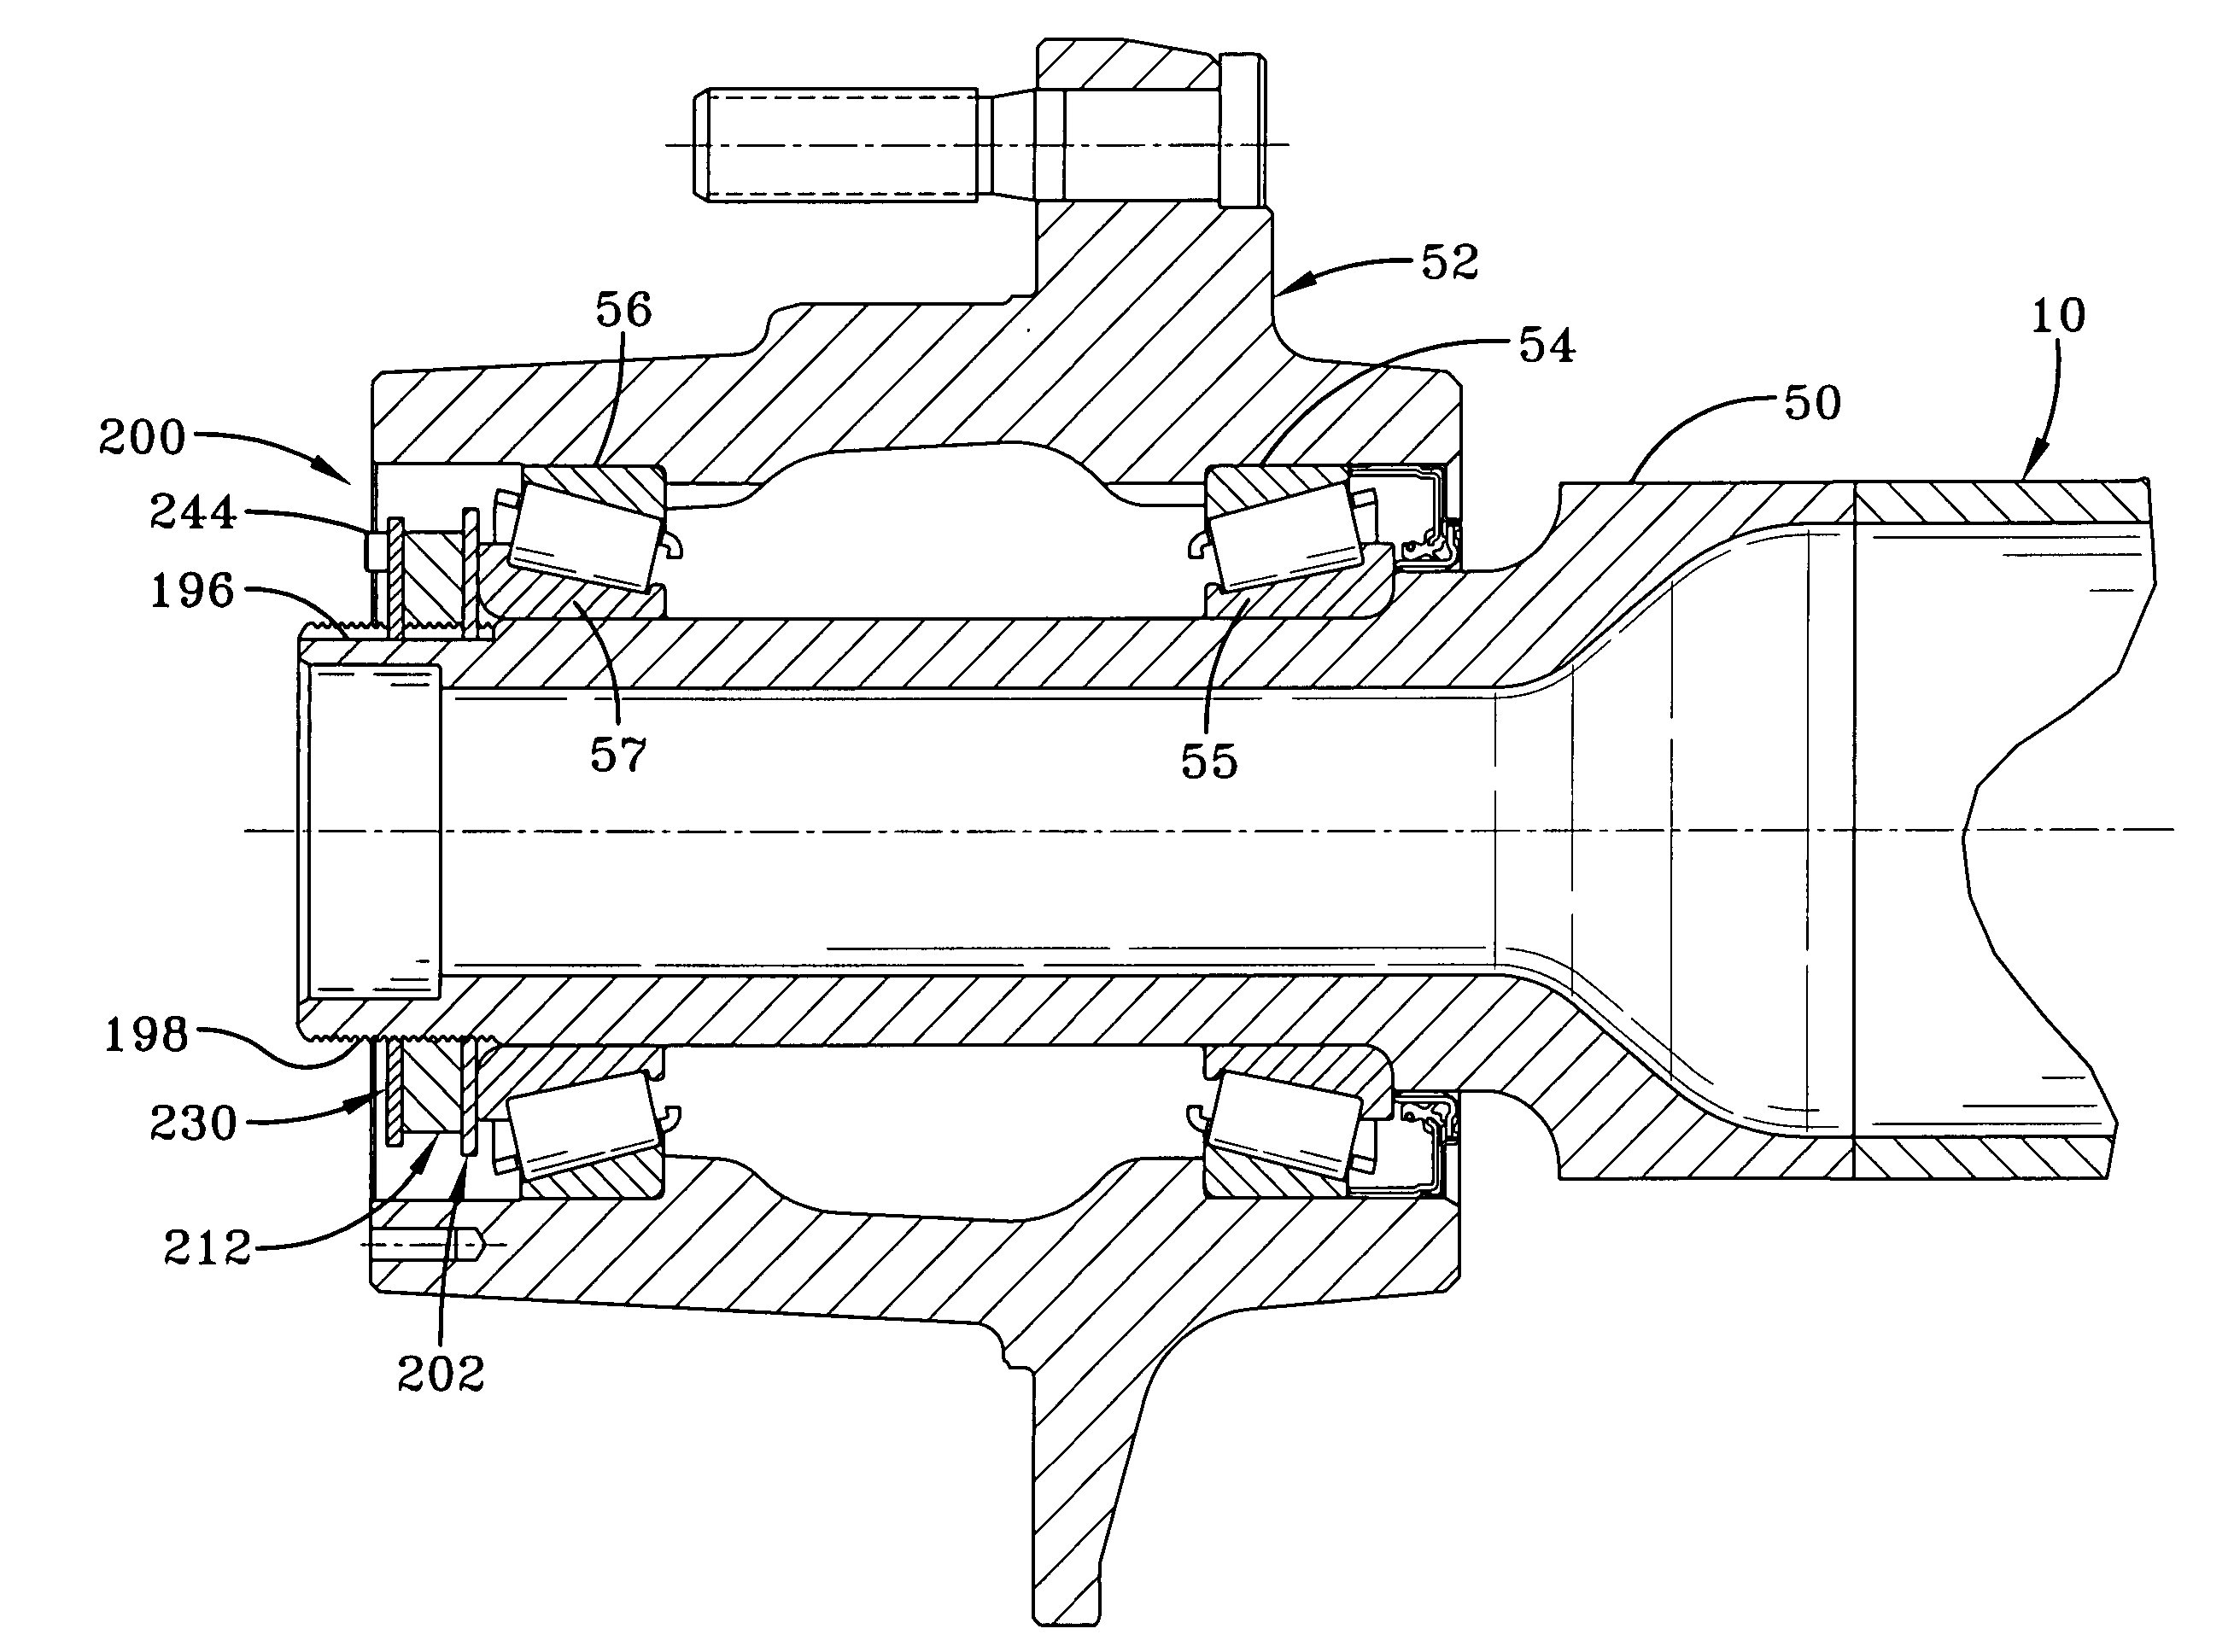 Axle spindle nut assembly for heavy-duty vehicles